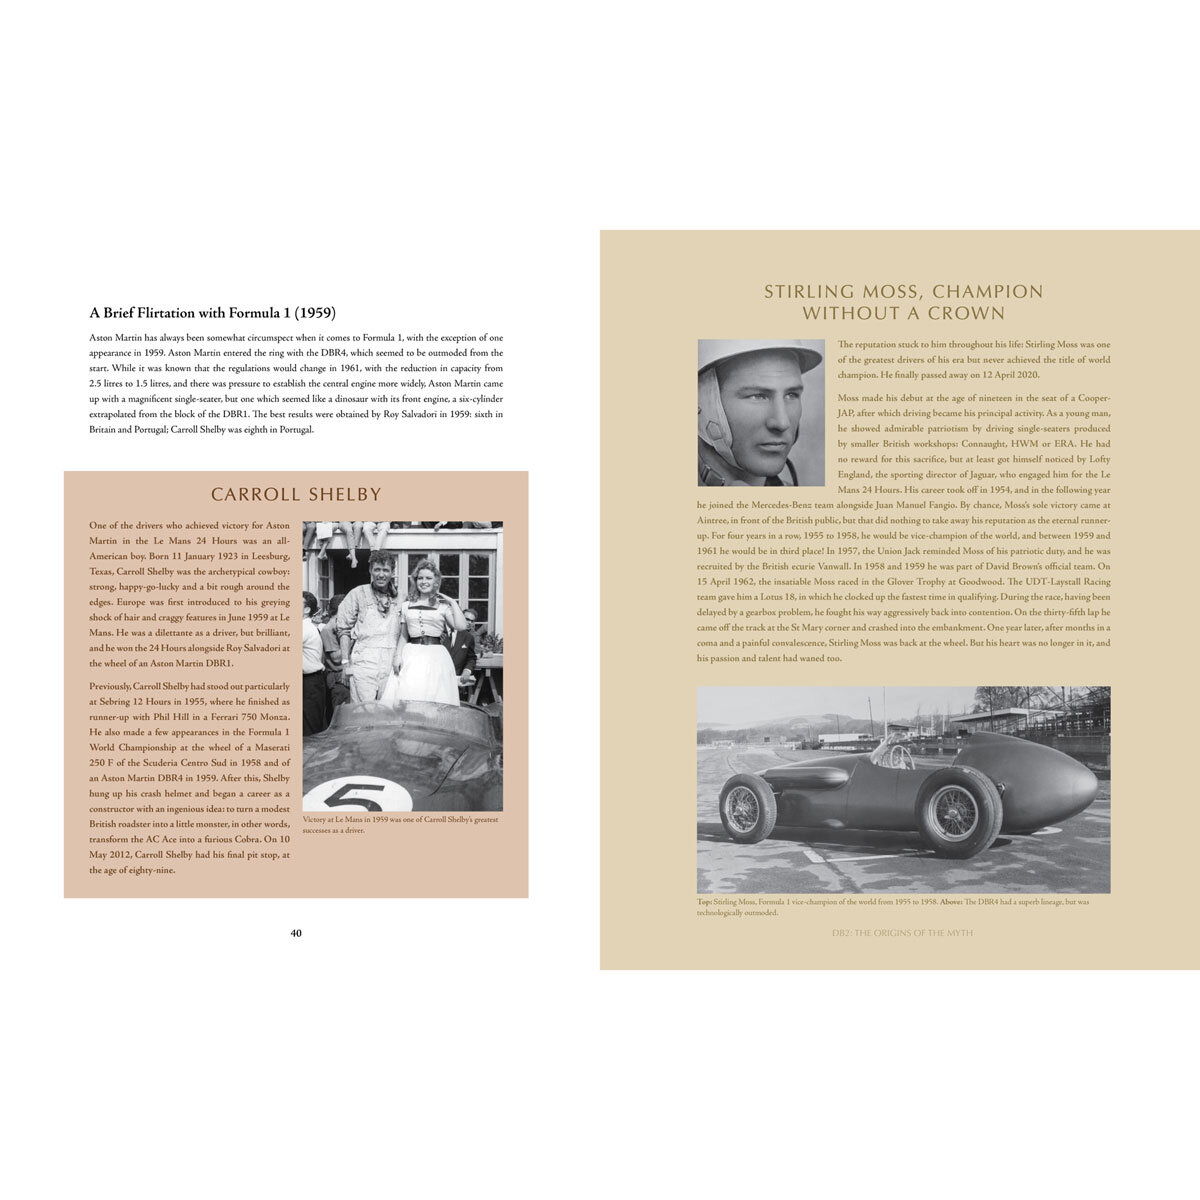 Page spread describing Carroll Shelby and Stirling Moss